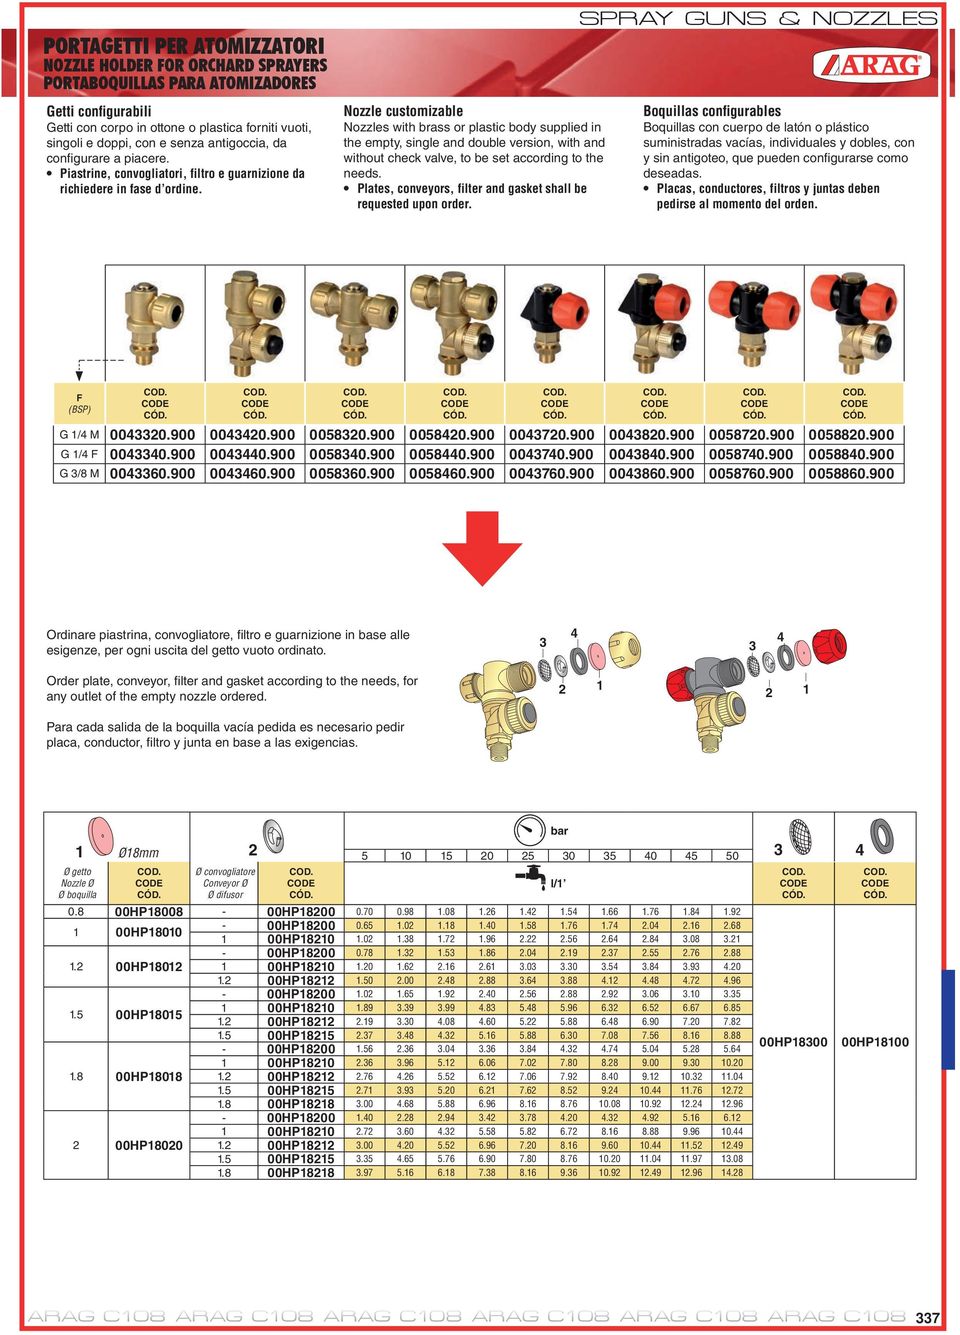 Nozzle customizable Nozzles with brass or plastic body supplied in the empty, single and double version, with and without check valve, to be set according to the needs.